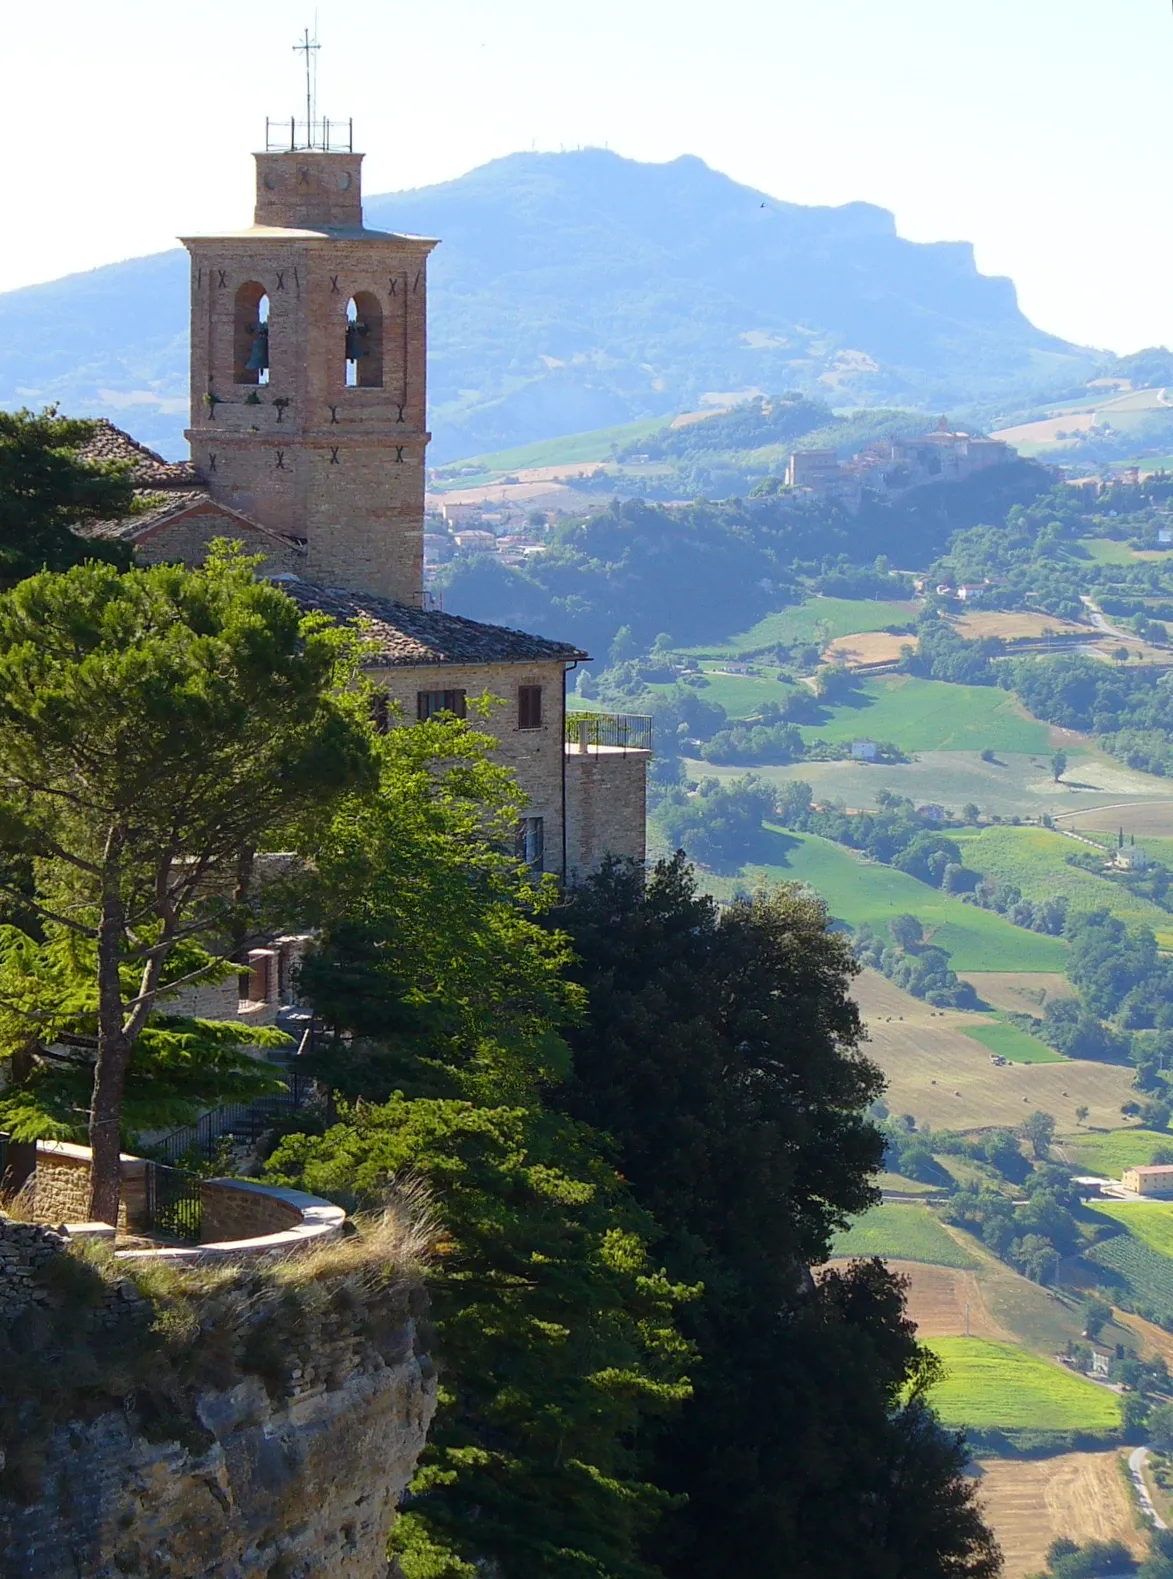 Photo showing: View from the village of Montefalcone Appennino, in the Province of Fermo in the Italian region Marche